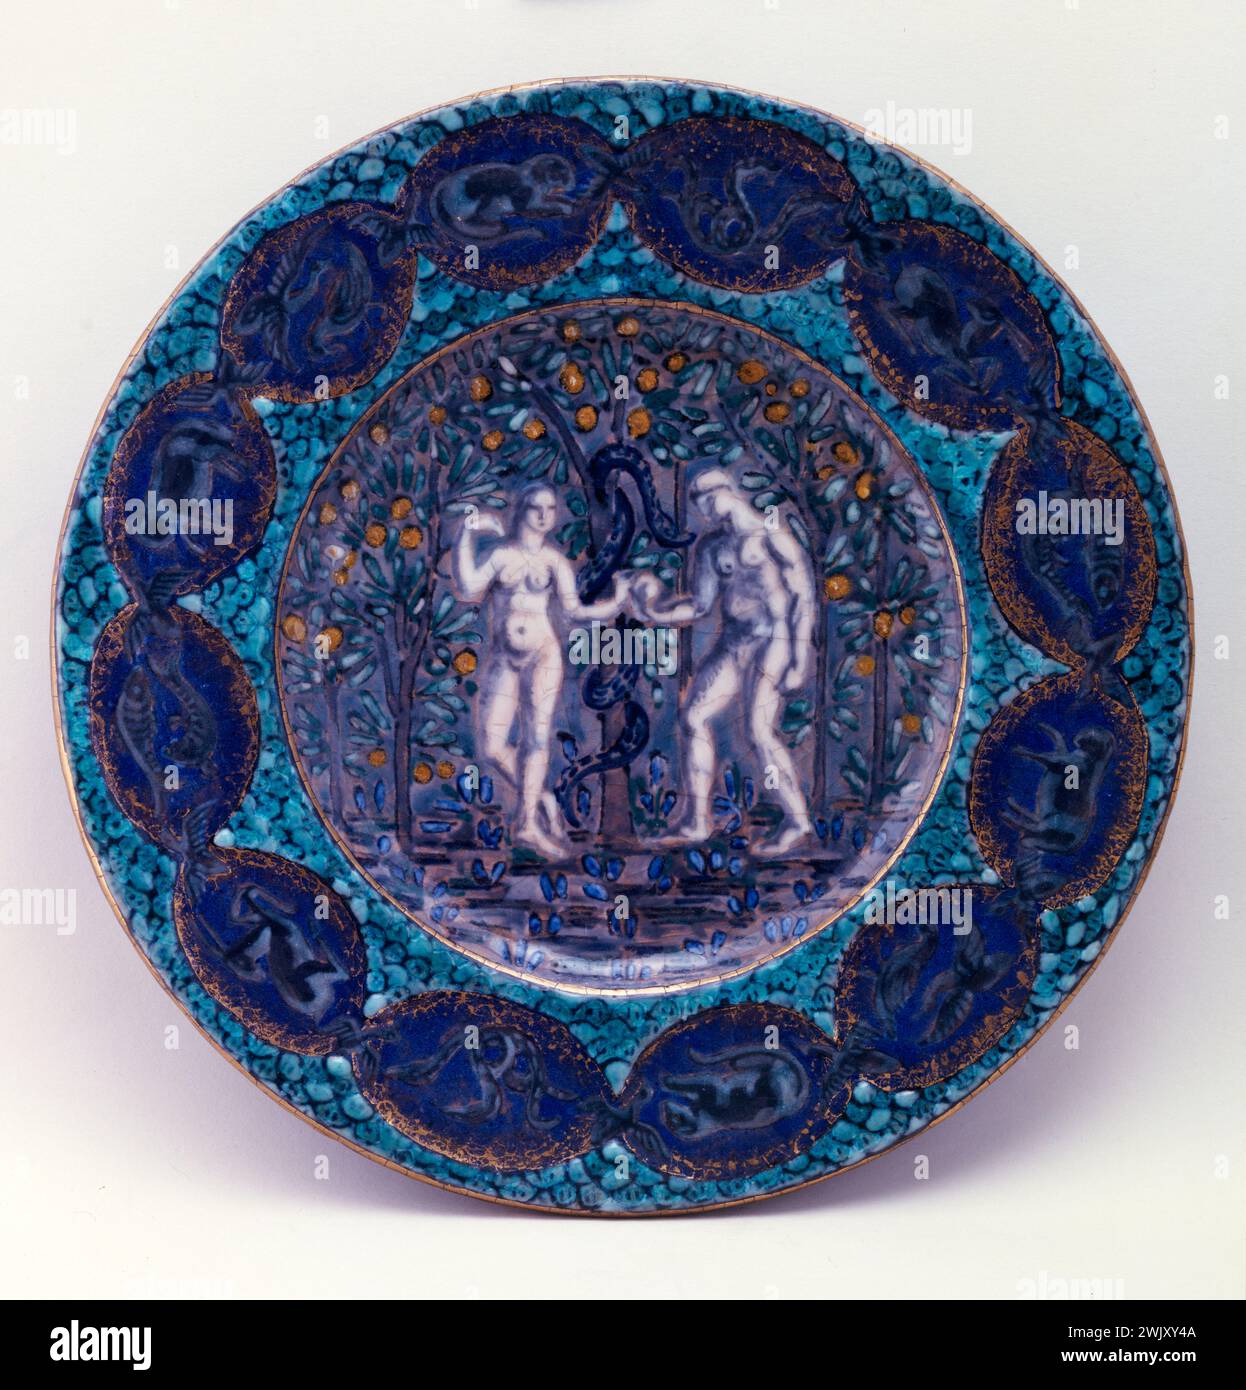 André Metthey (1871-1920). 'Adam and Eve'. Earthenware. Museum of Fine Arts of the City of Paris, Petit Palais. Art Menager, Faience, Woman, Man, Eden Garden, Biblical Person, Crockery, 19th 19th 19th 19 19th 19th century, plate, Stock Photo